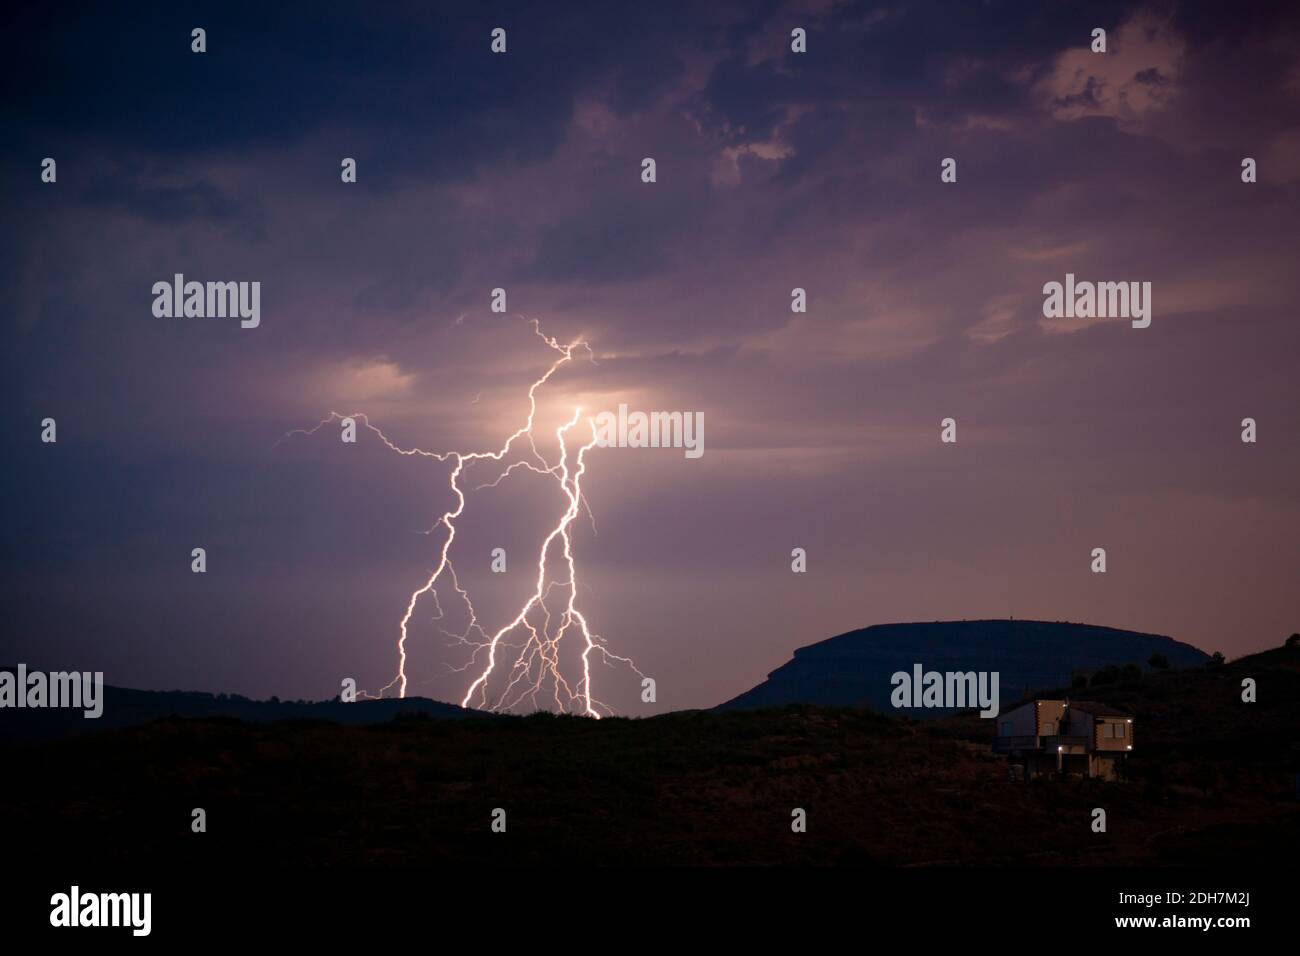 A silhouette shot of mountains with lightning bolts background Stock Photo